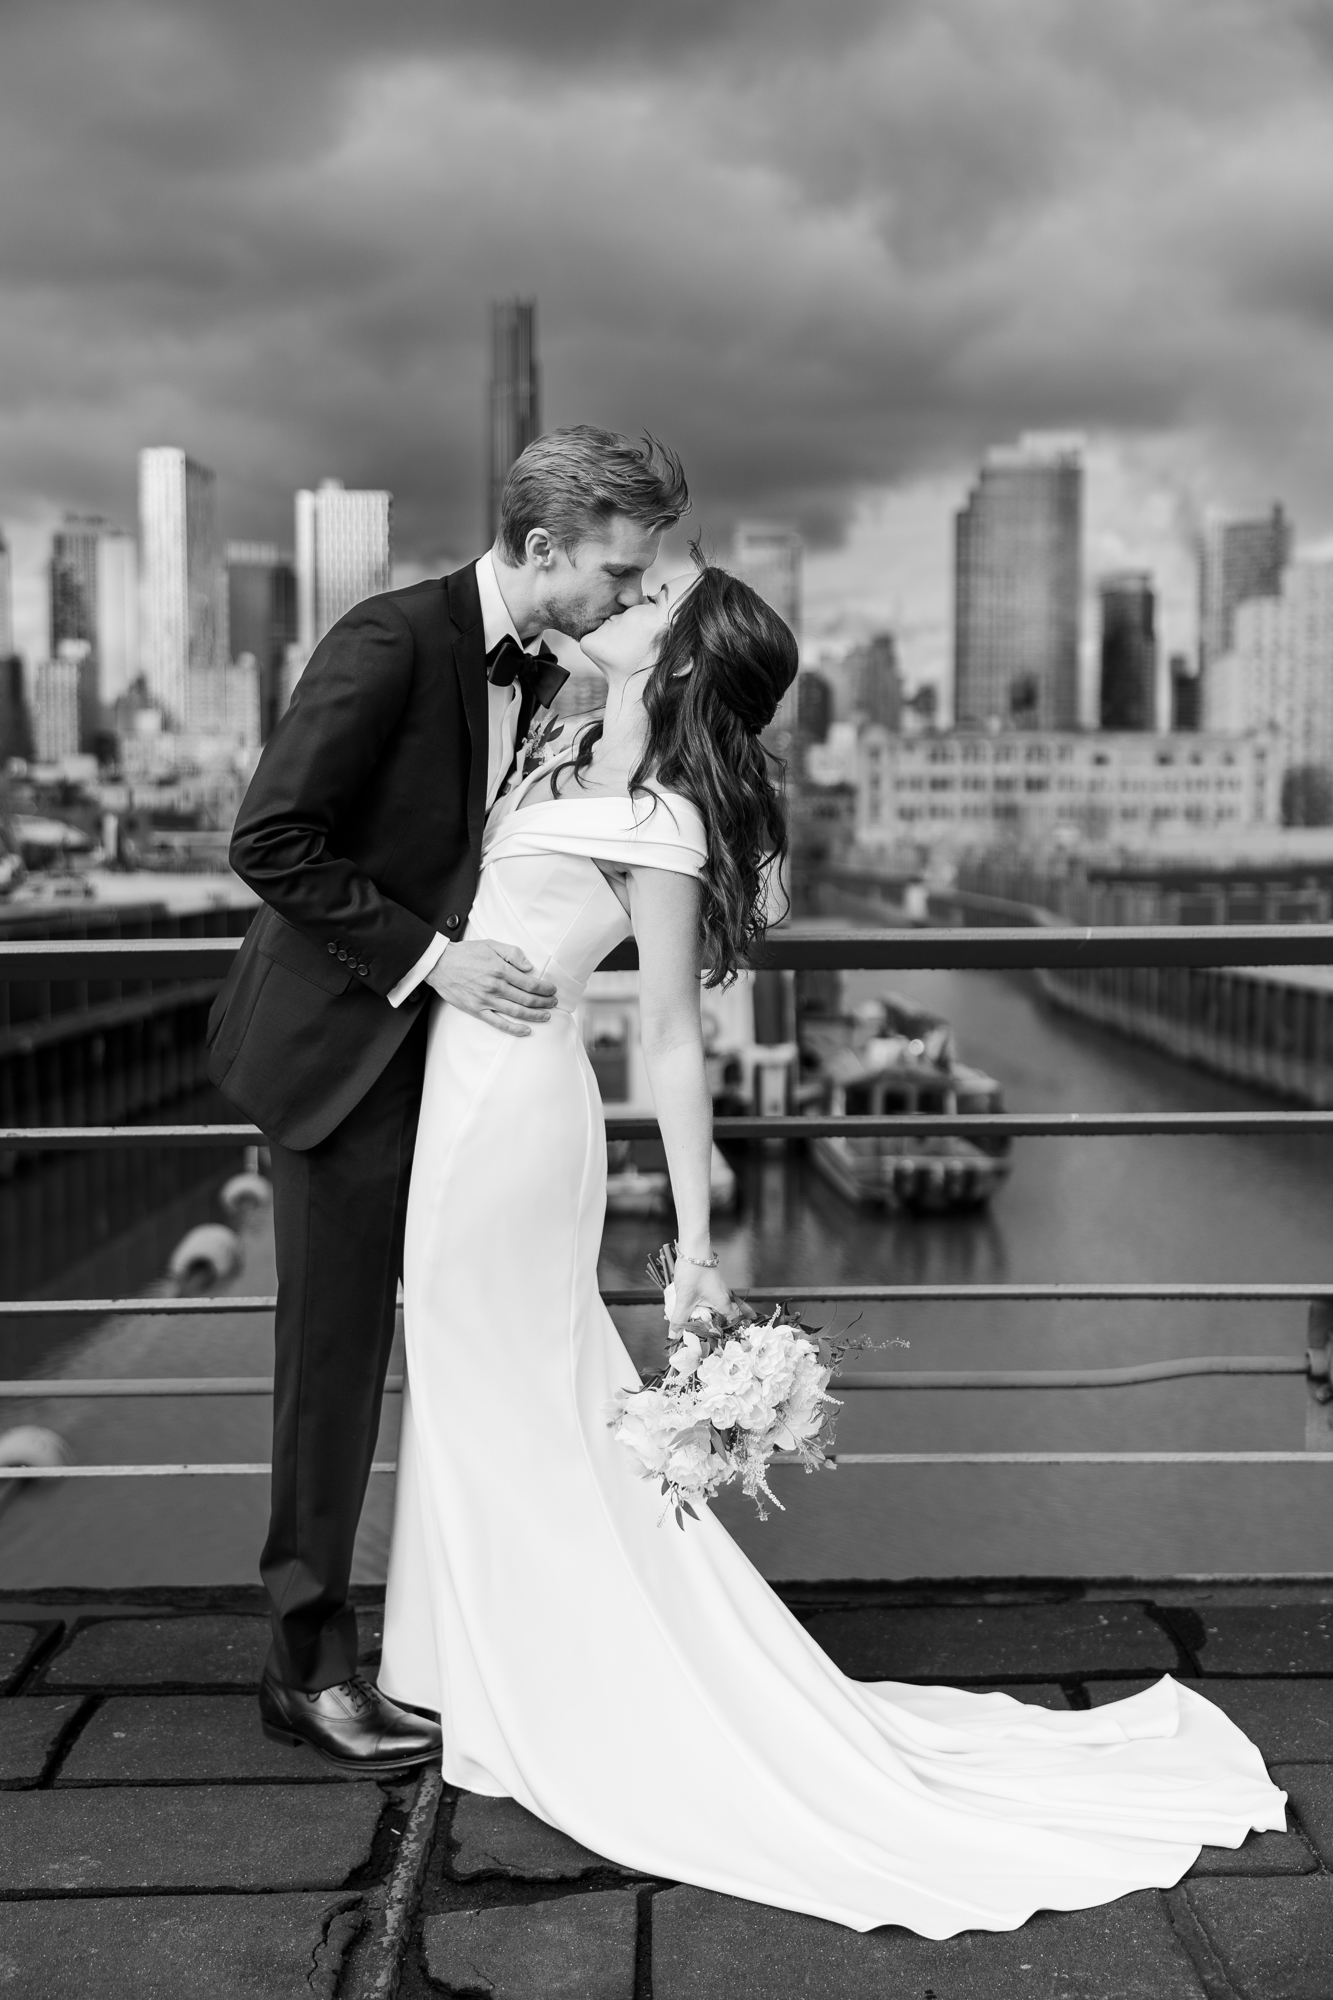 Playful Wedding at 501 Union in NYC